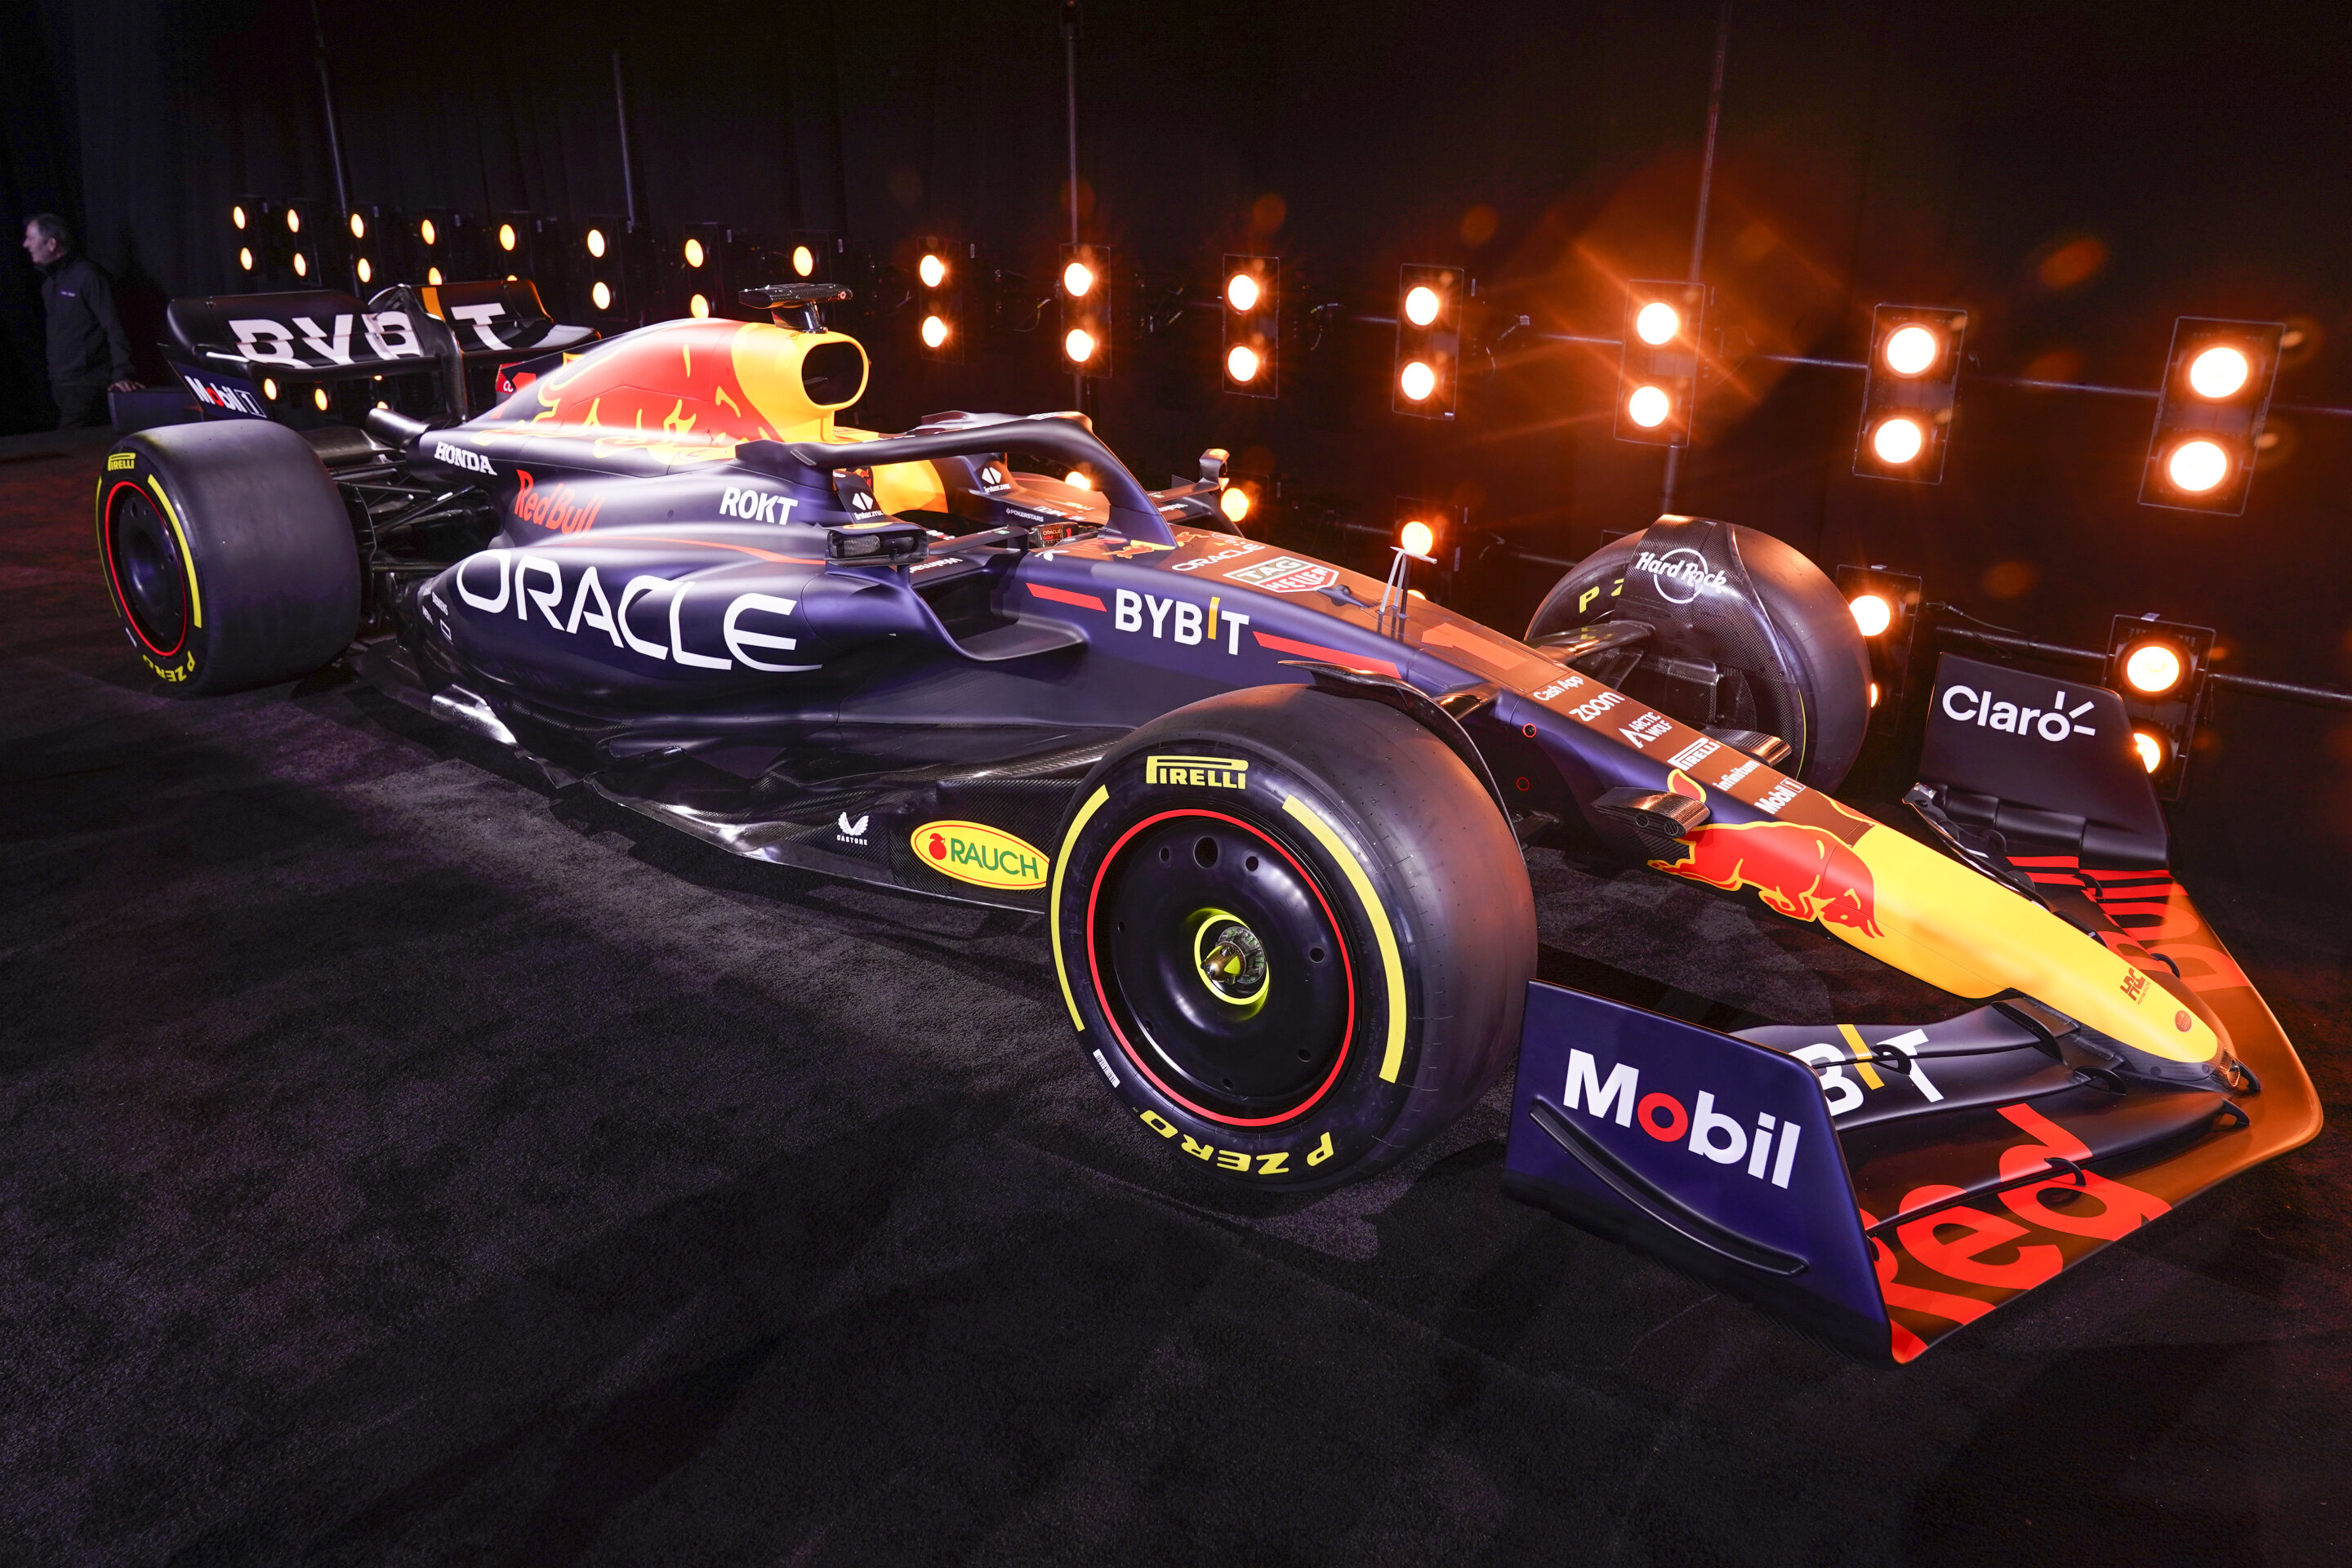 #Ford returns to Formula One in partnership with Red Bull